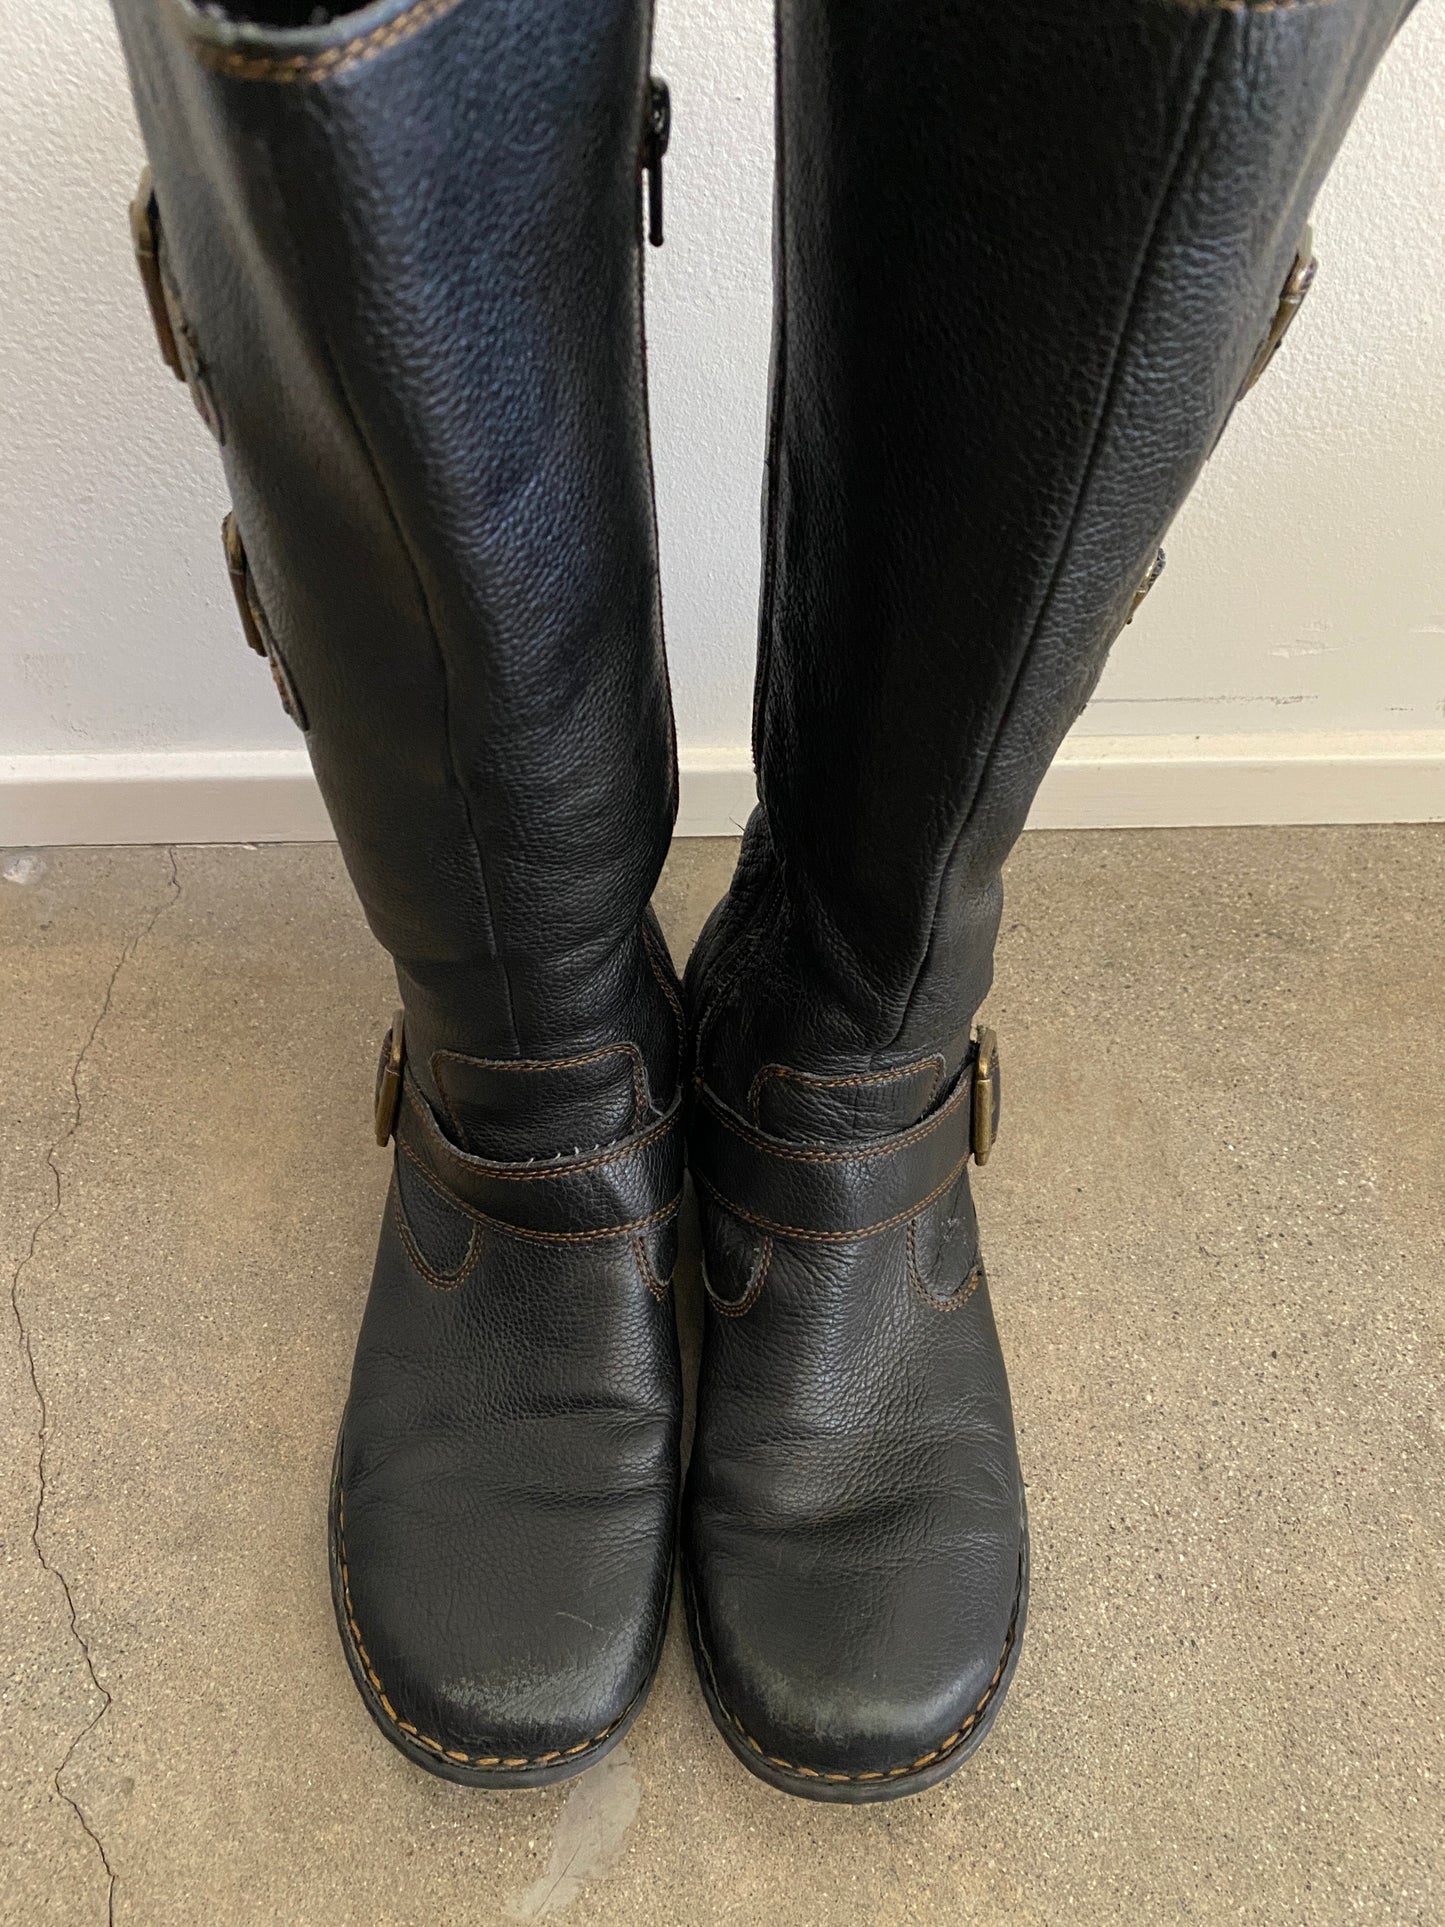 00's Black Leather Buckle Boots